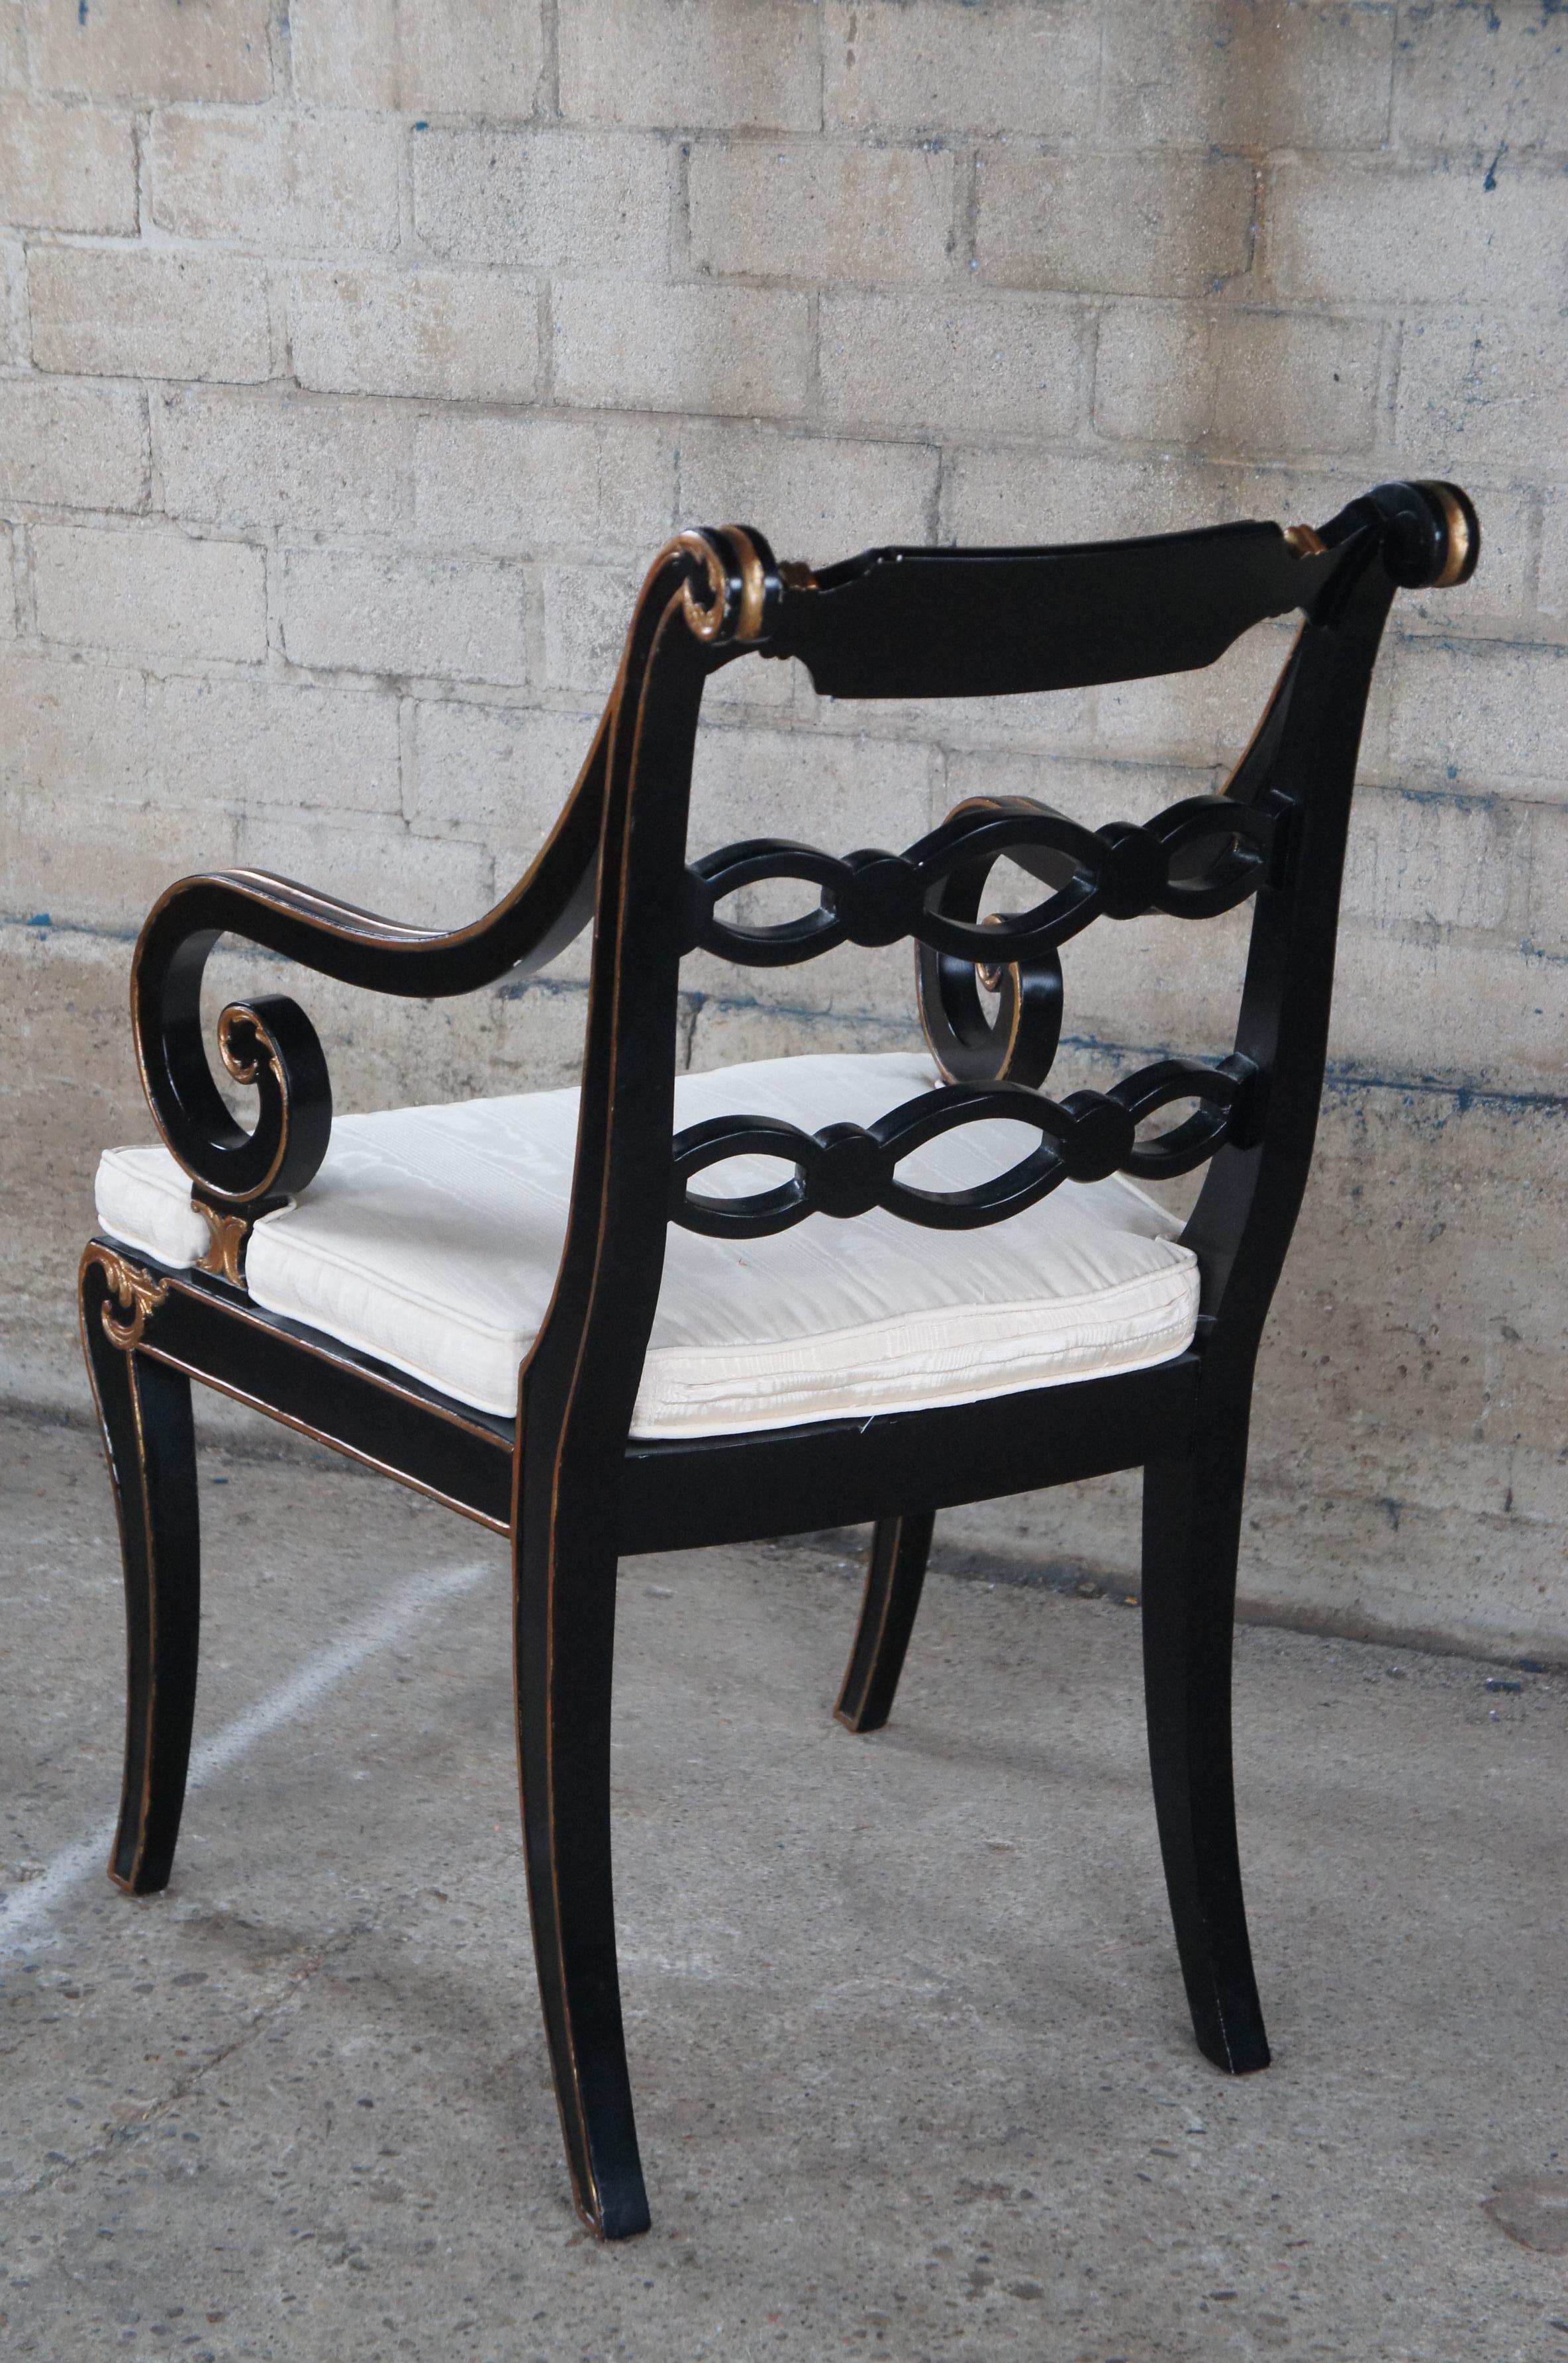 20th Century English Regency Caned Riddle Back Ebonized Black & Gold Scrolled Arm Chair  For Sale